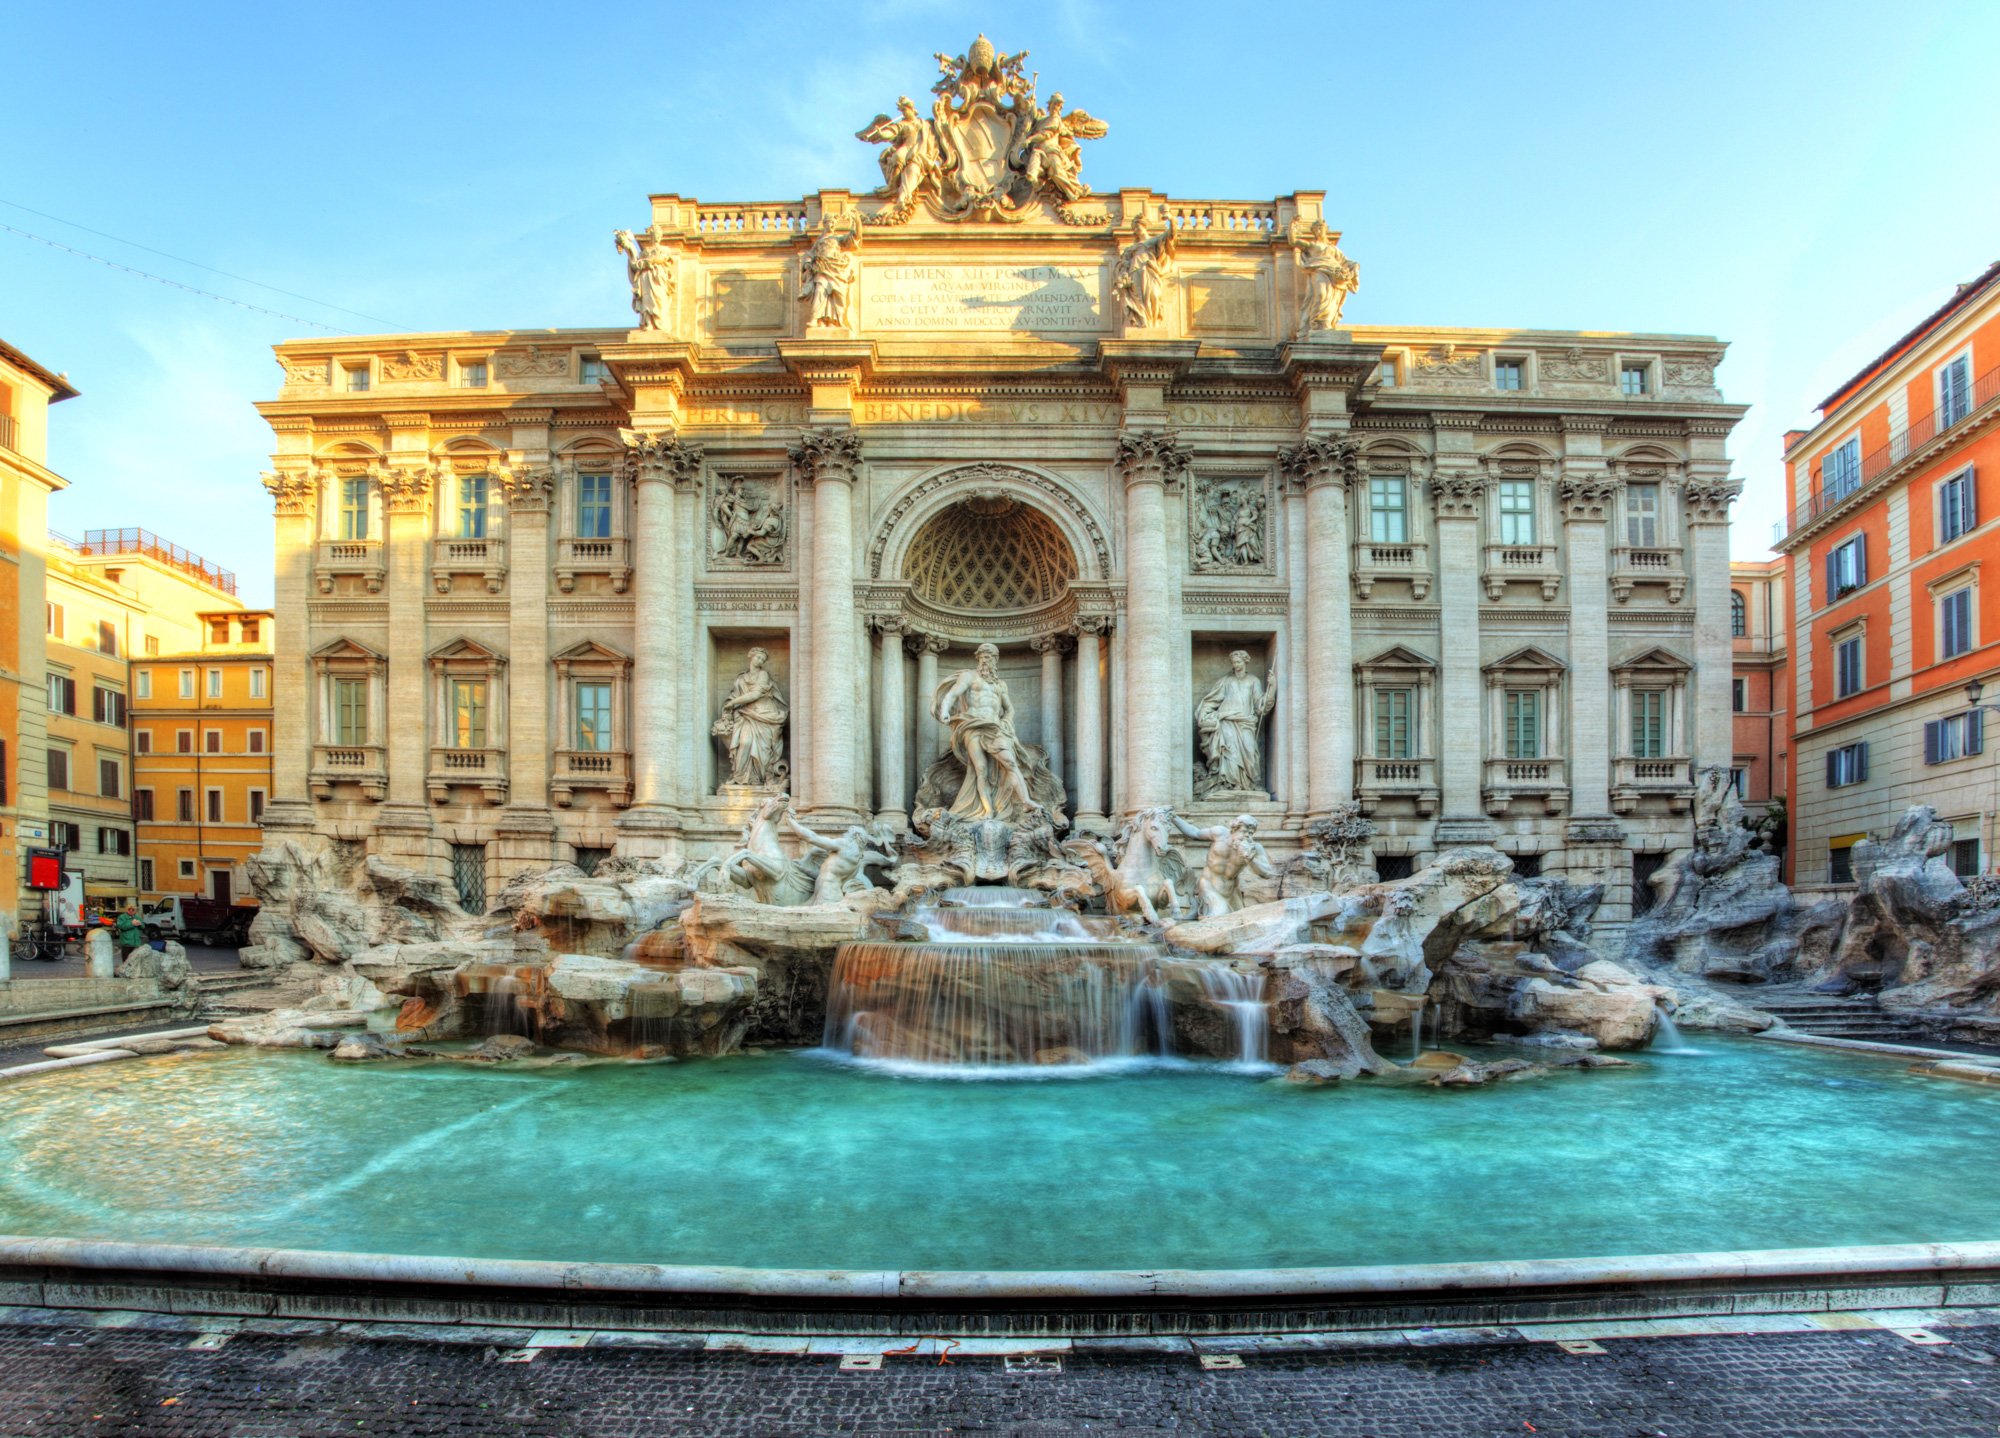 The history of the Trevi Fountain in Rome, Italy | Black Tomato